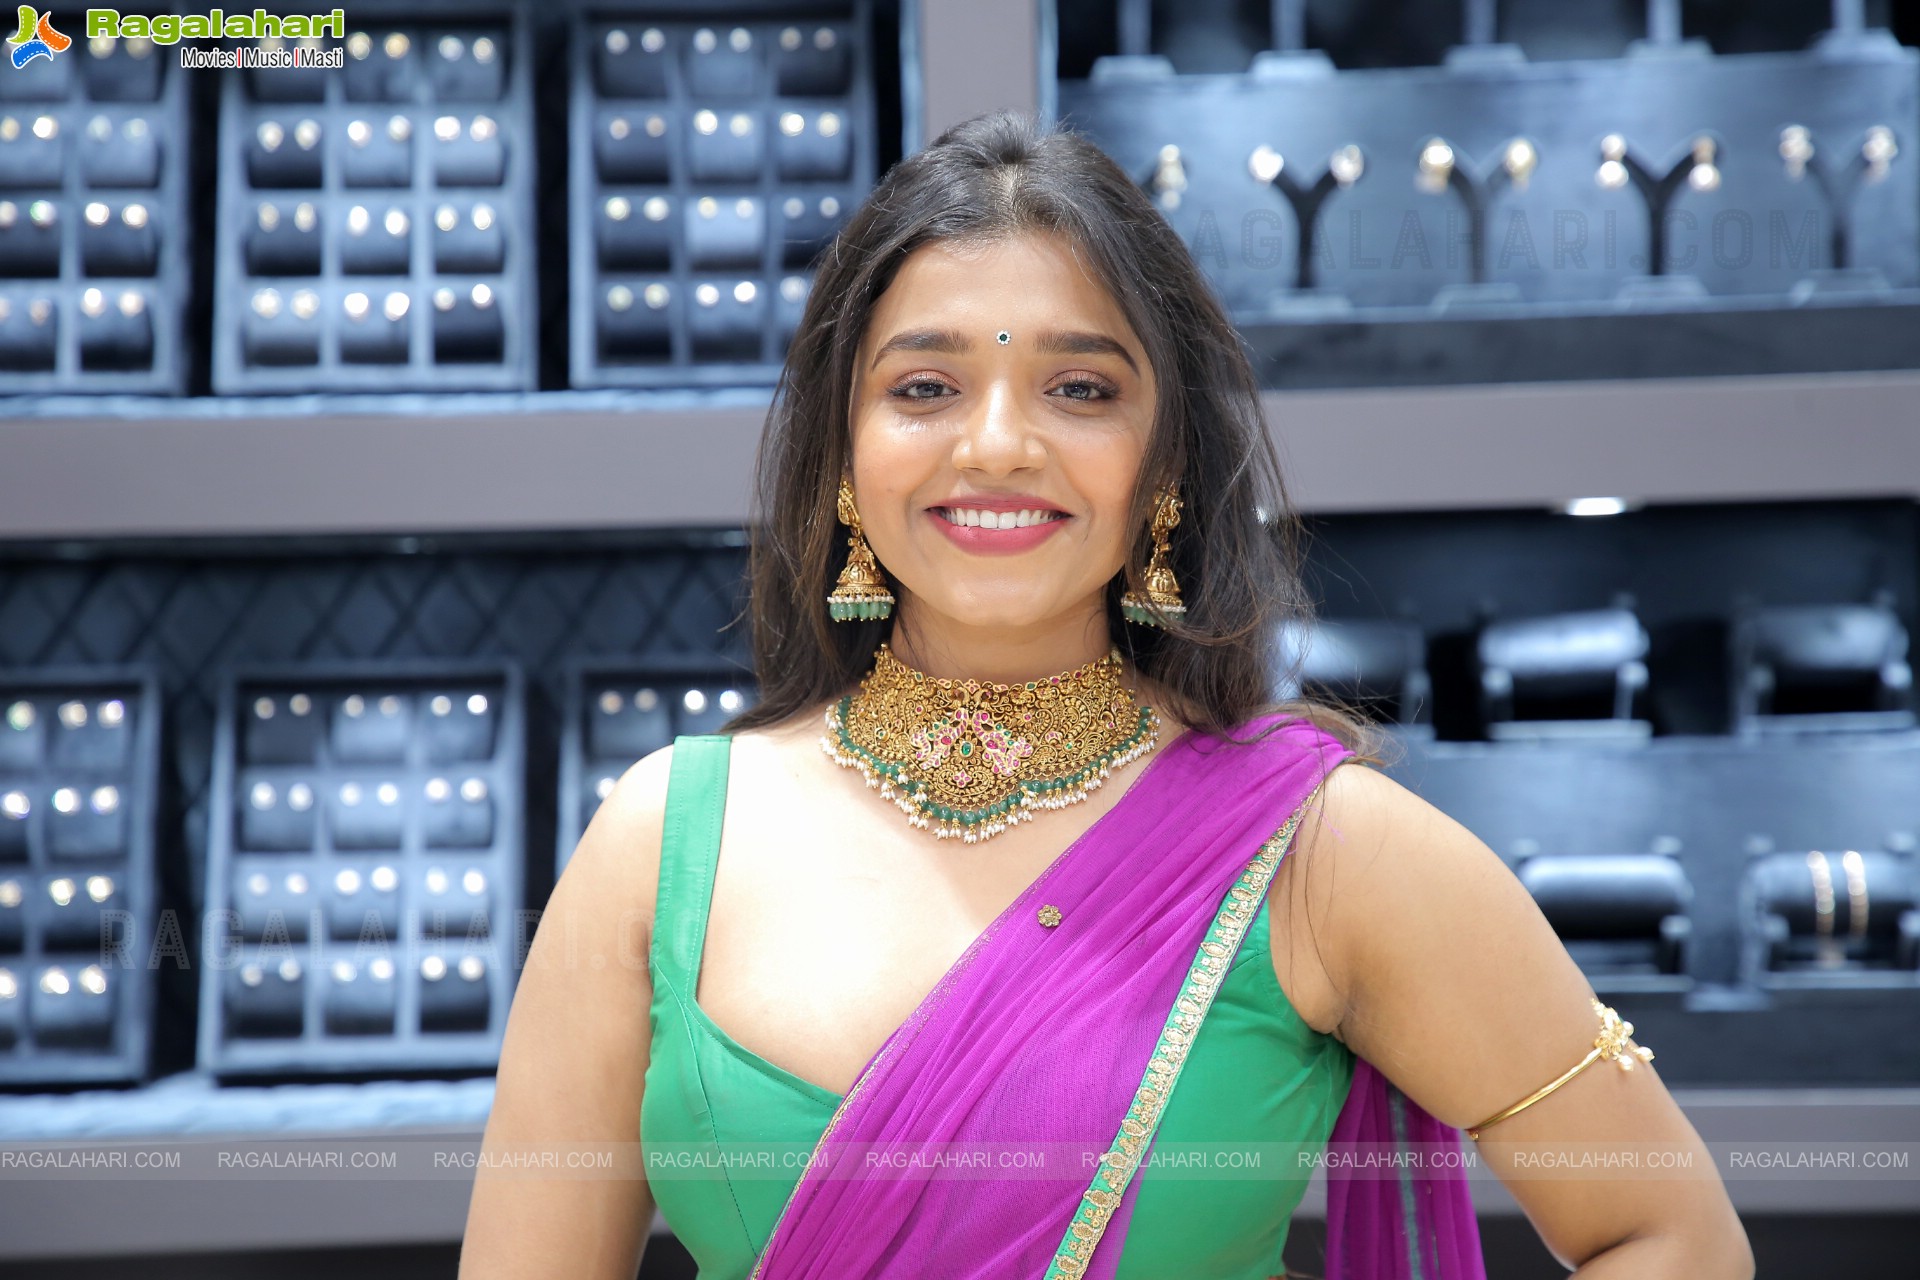 Kruthika Roy Poses With Jewellery, HD Photo Gallery